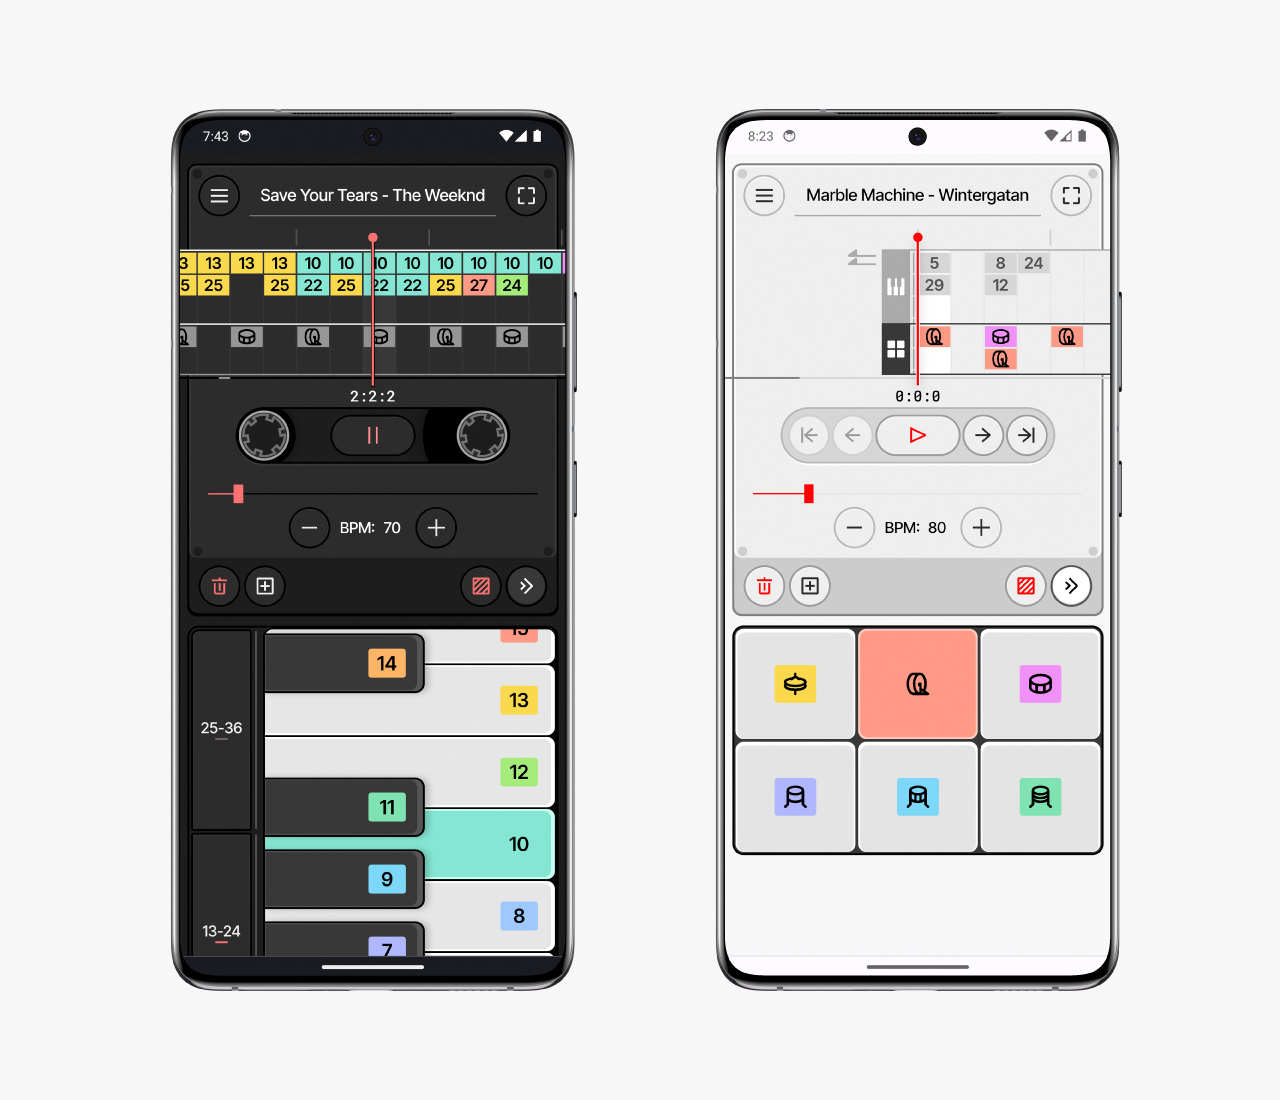 Mini Synth running on two Galaxy S21s in dark and light mode respectively. The player looks like a cassette with a keyboard or soundboard below it.